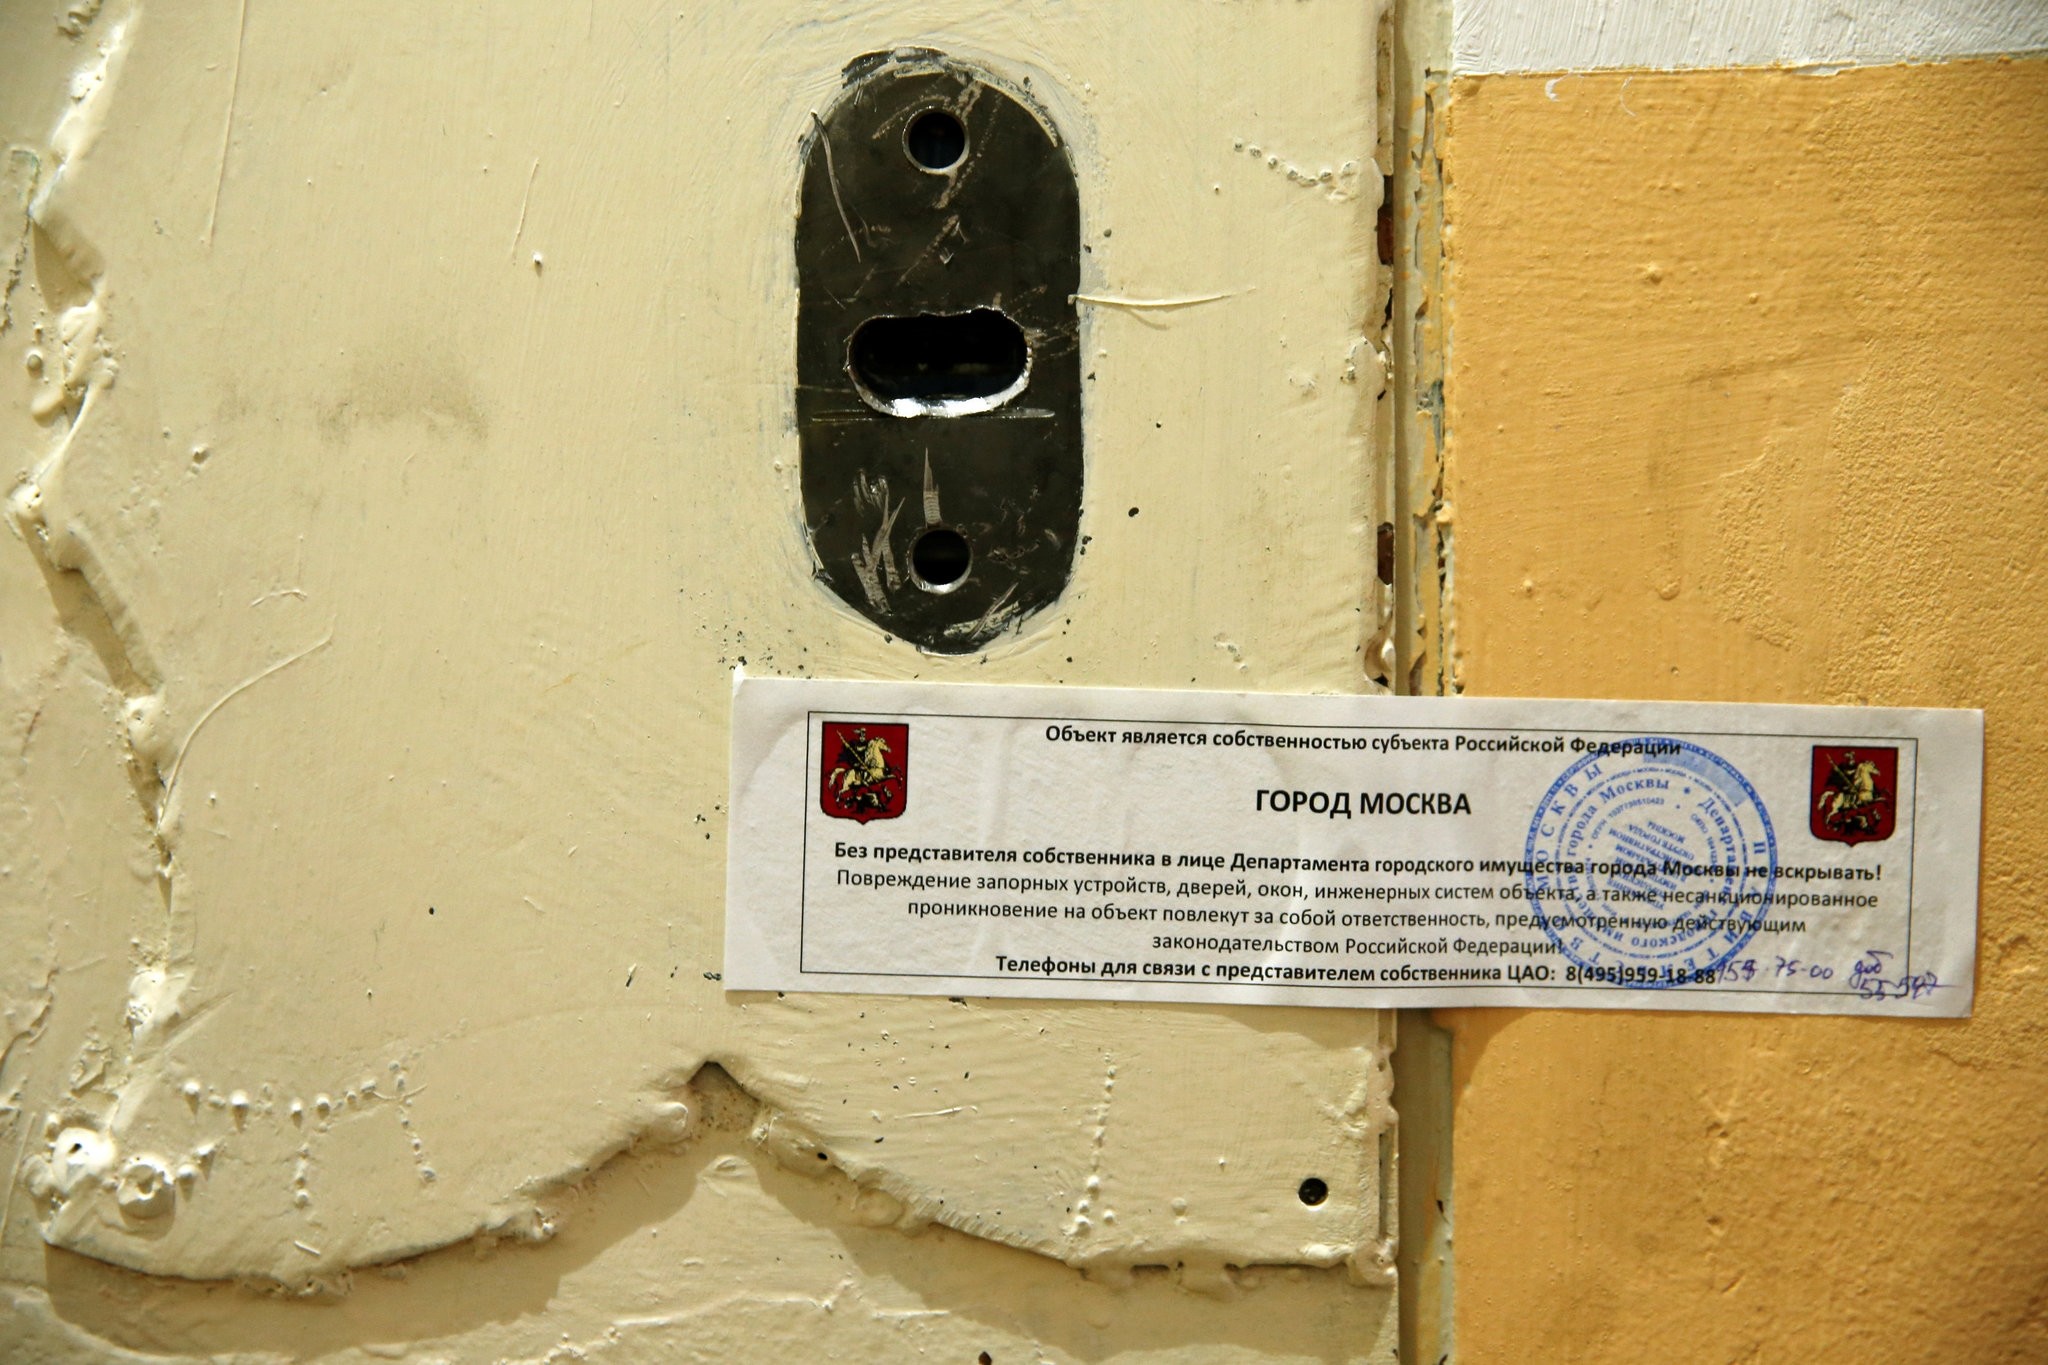 The office door of rights group Amnesty International is sealed off in Moscow, Russia, November 2, 2016. (REUTERS Photo)